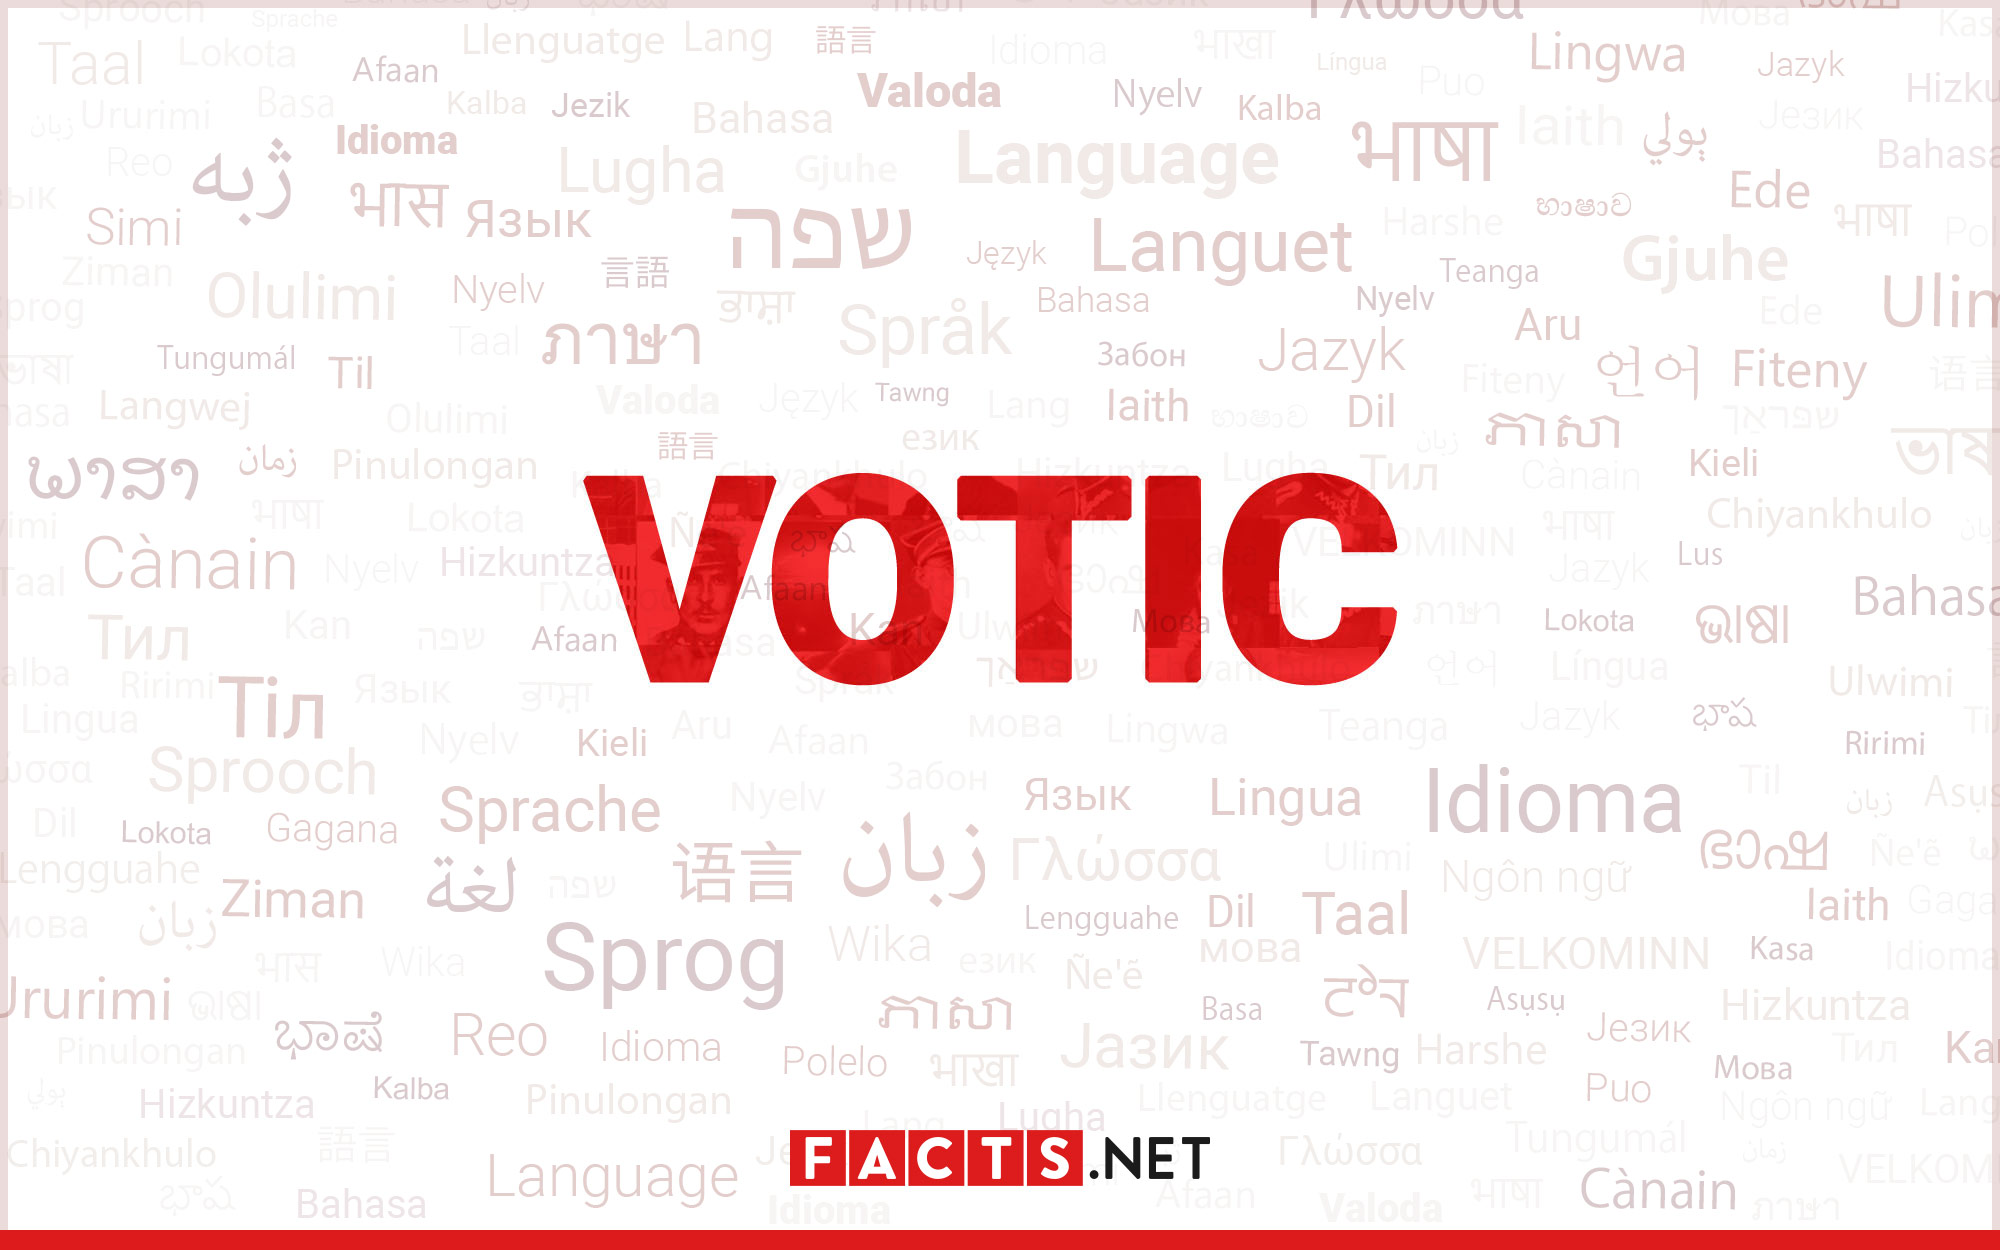 16-intriguing-facts-about-votic